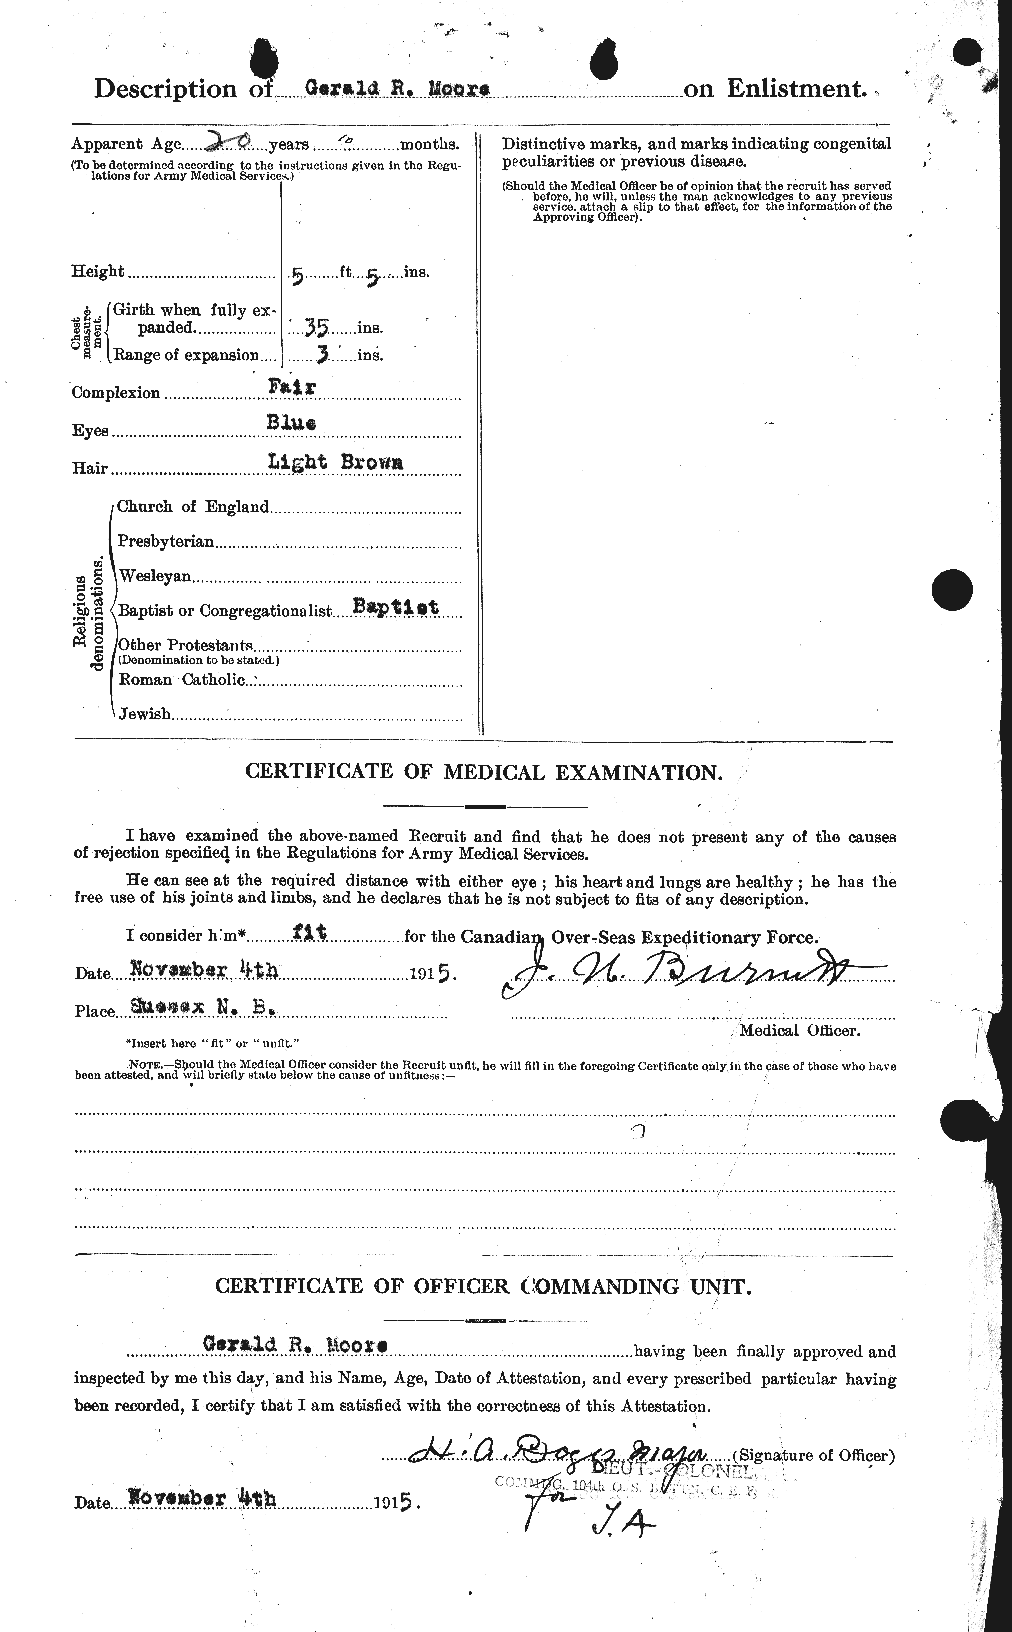 Personnel Records of the First World War - CEF 502035b